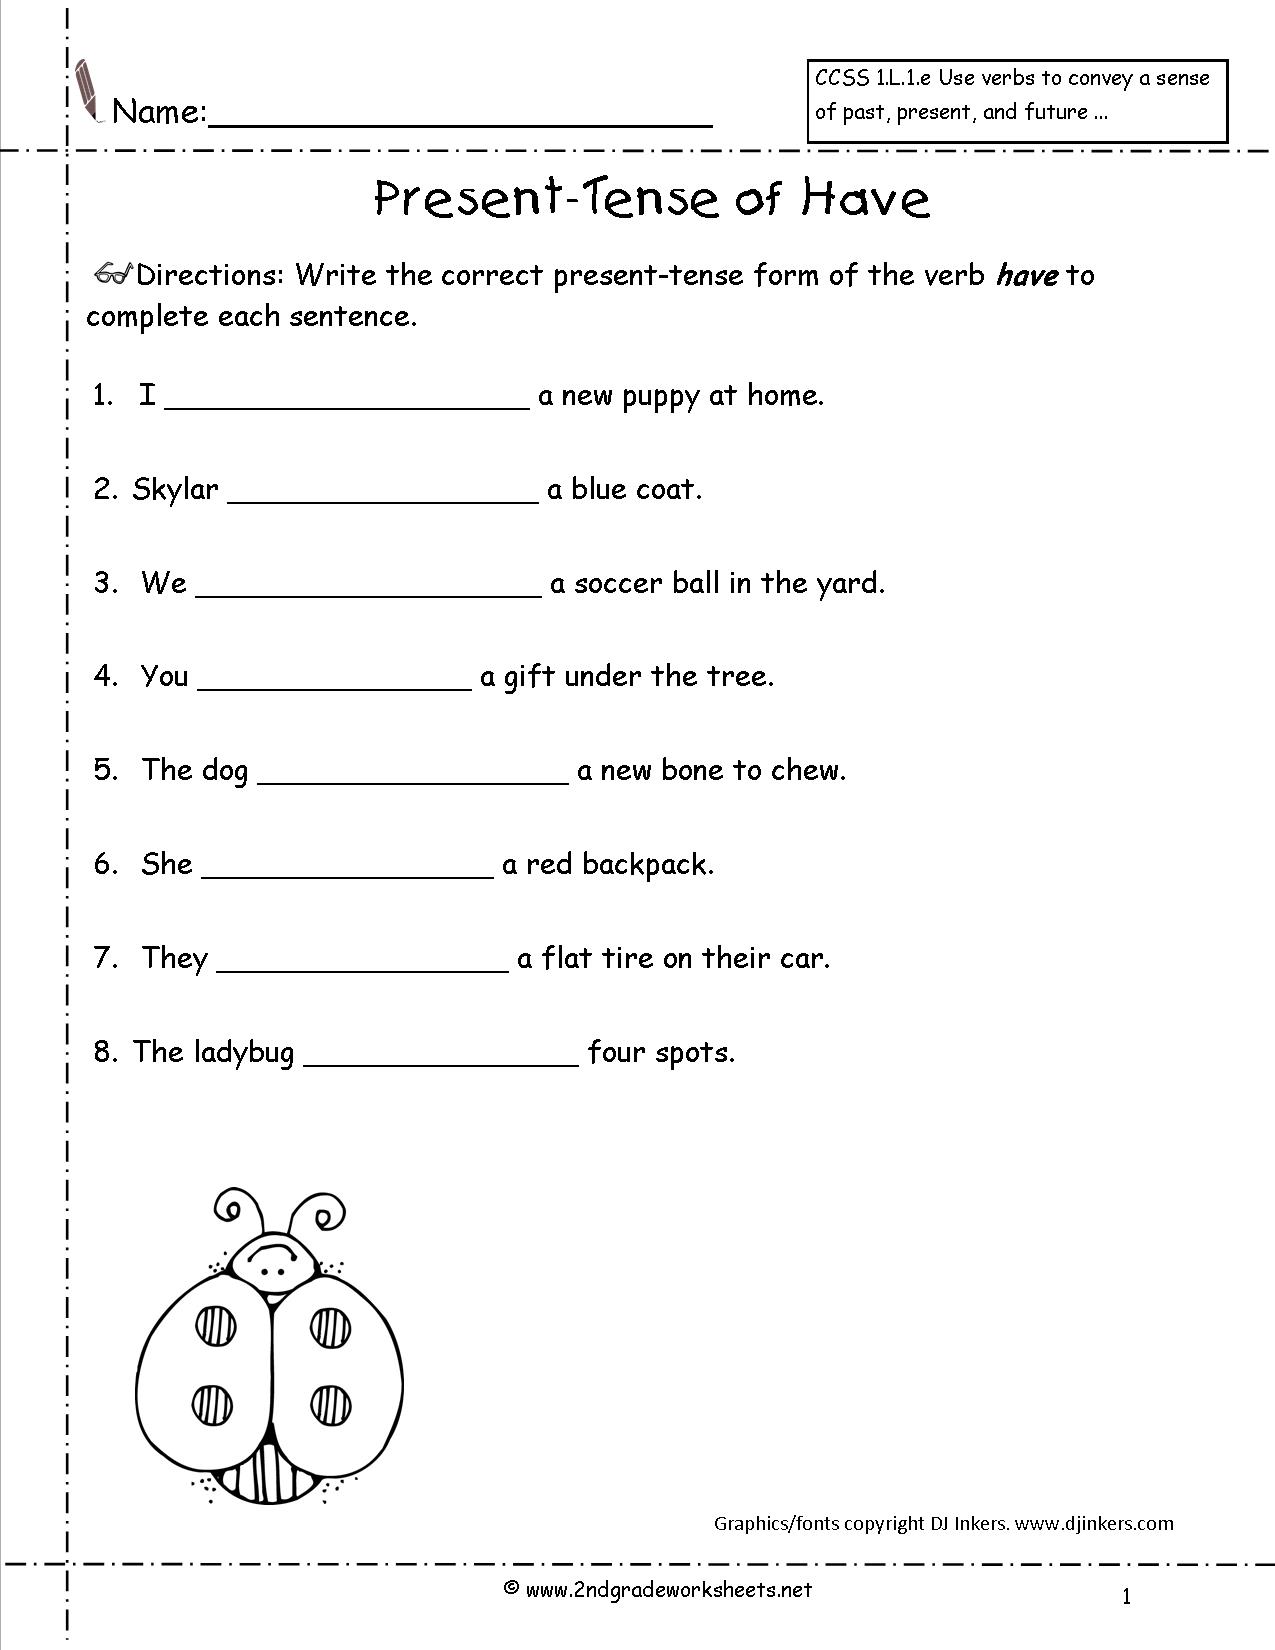 18 Best Images of Adding S To Nouns Worksheets - Singular and Plural